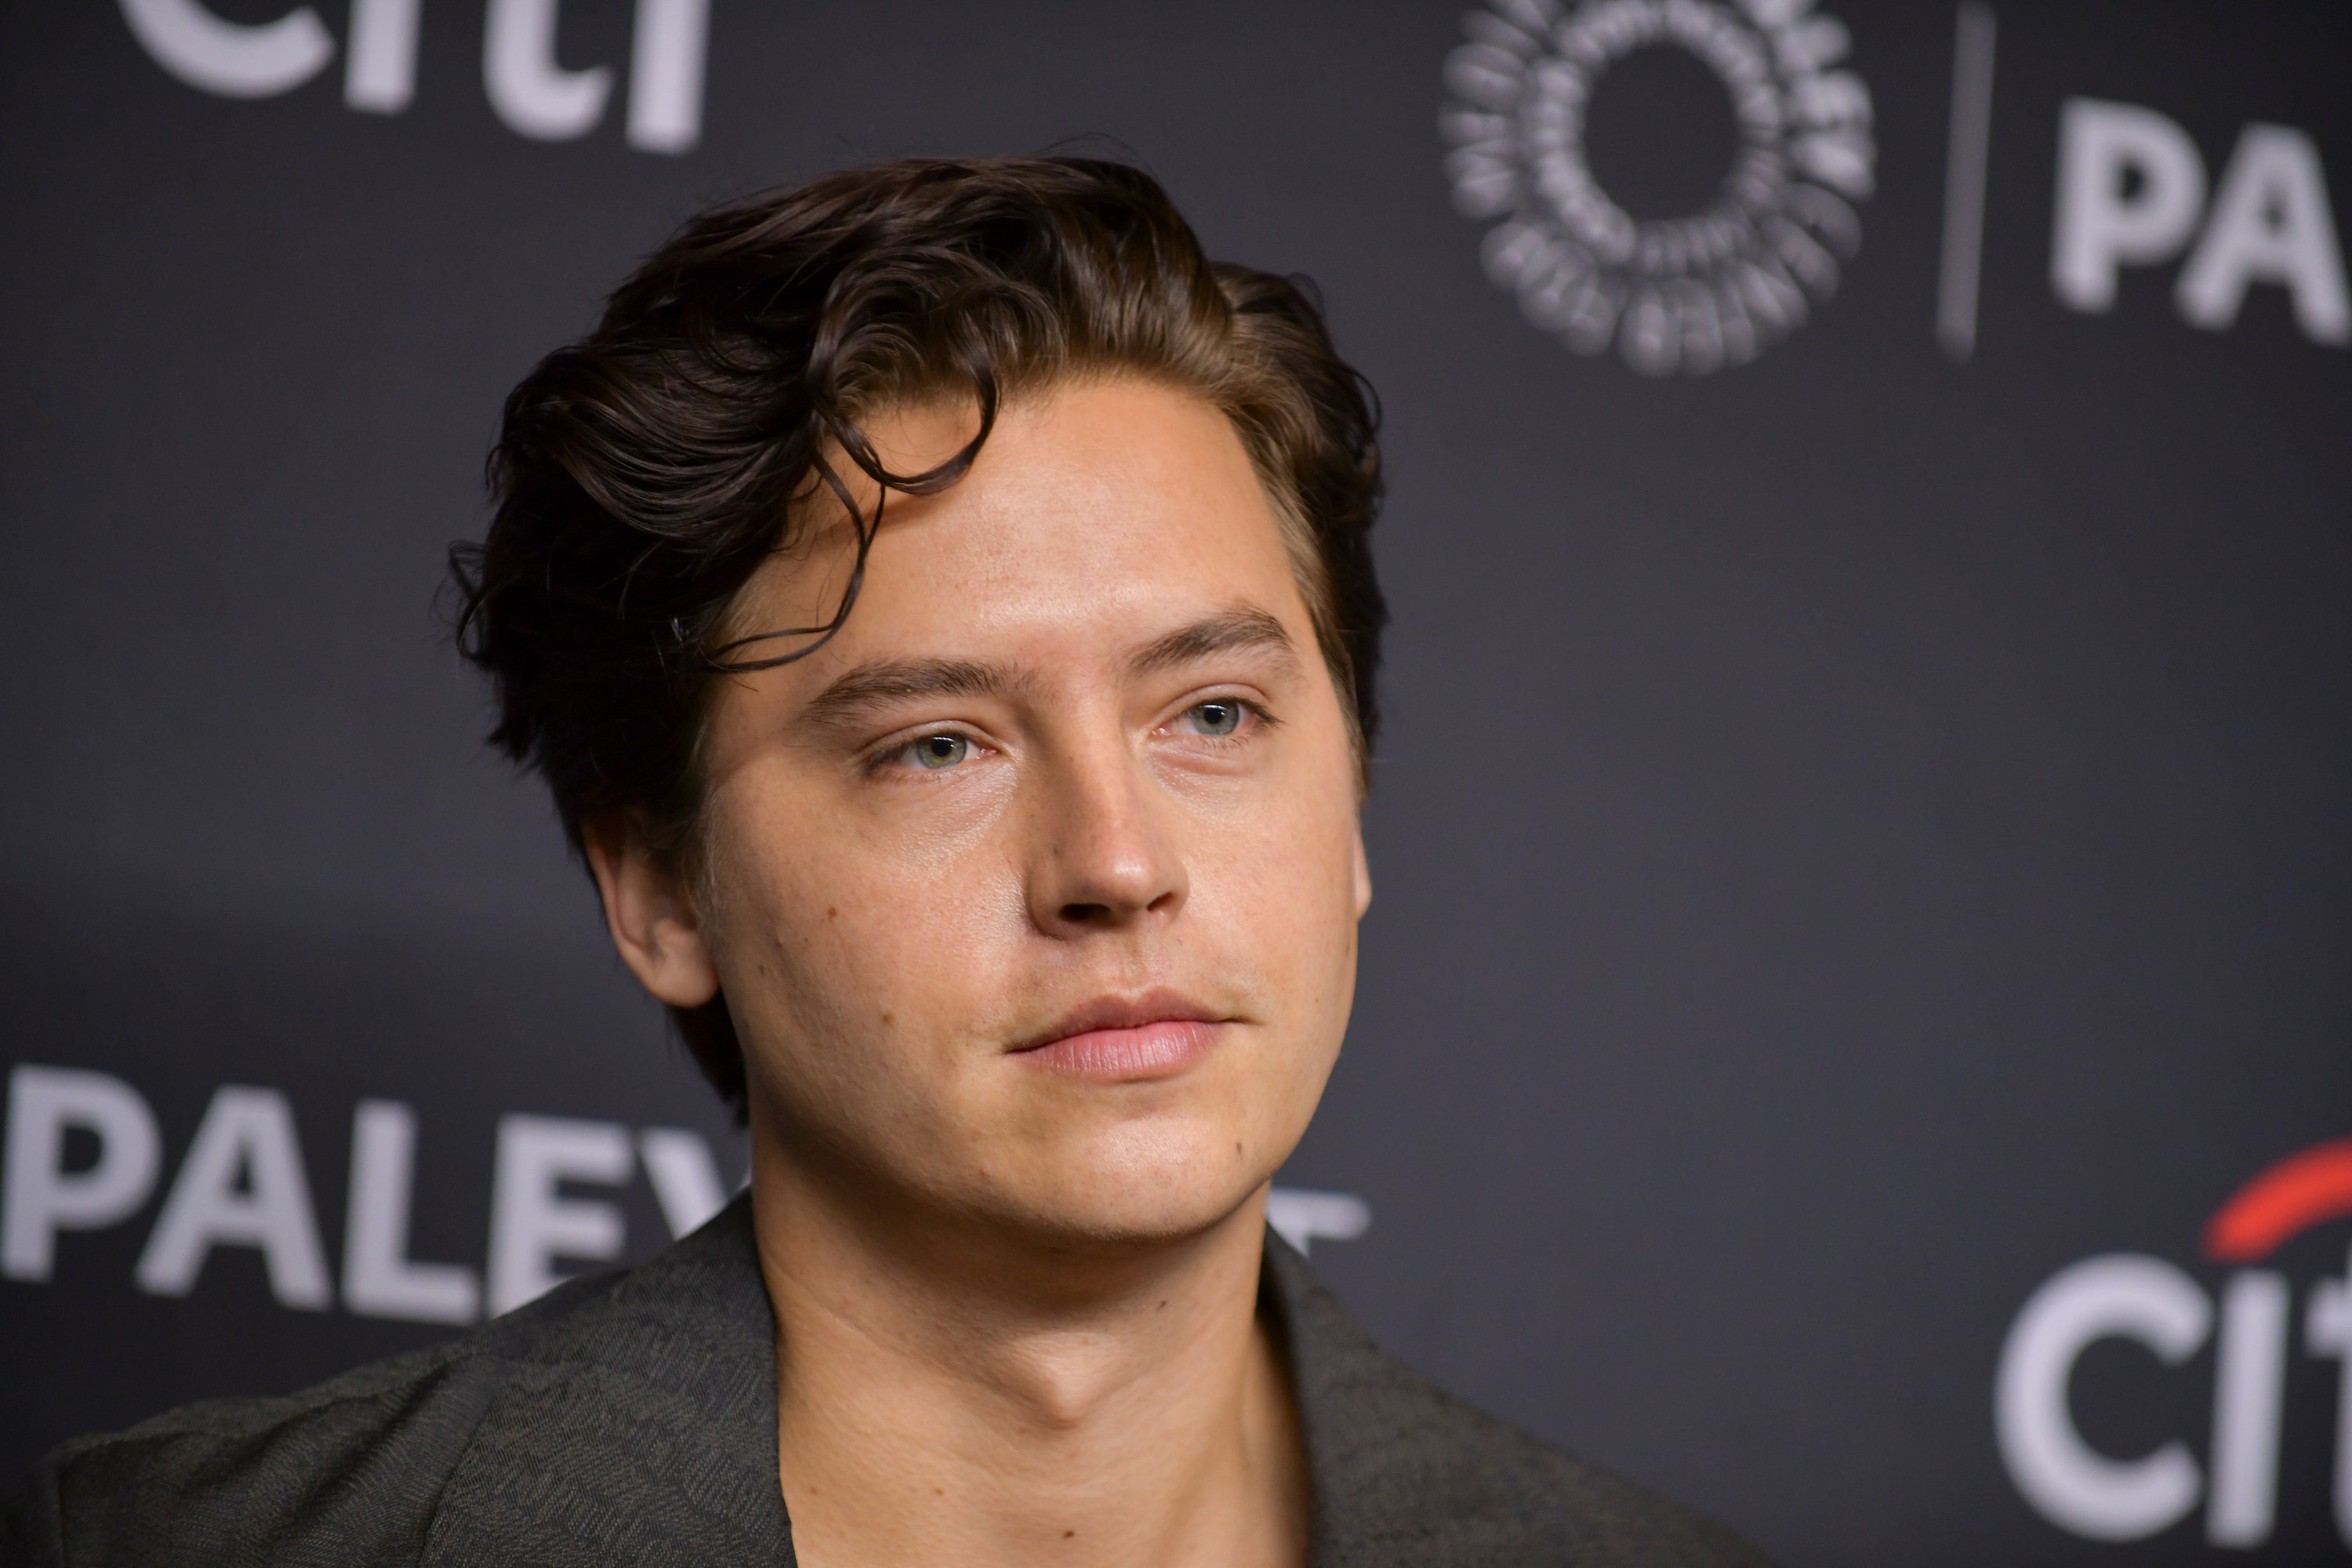 Former Disney star Cole Sprouse says Hollywood 'encourages the worst